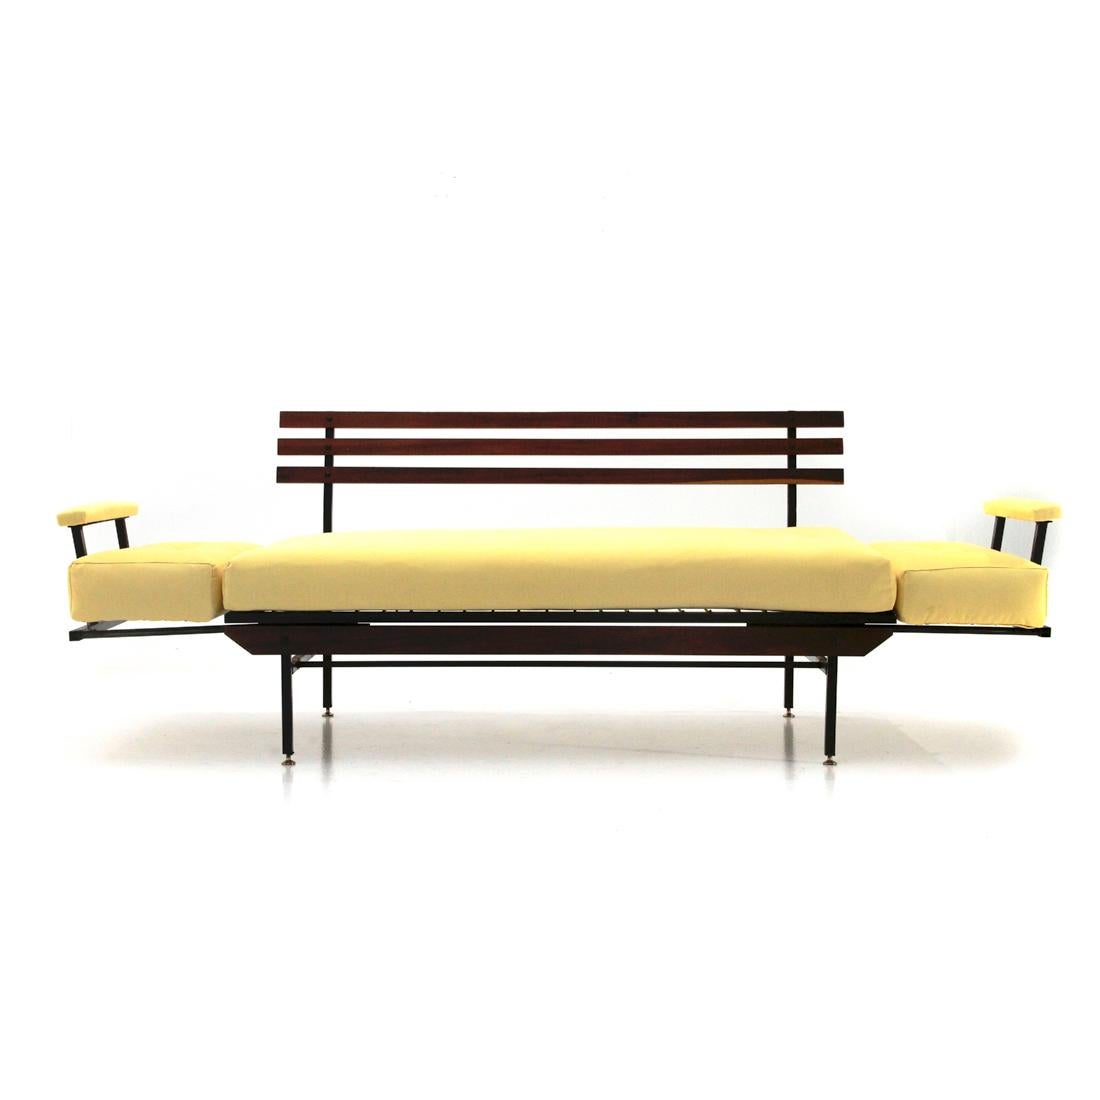 Mid-20th Century Italian Midcentury Sofa Bed in Yellow Fabric, 1950s For Sale